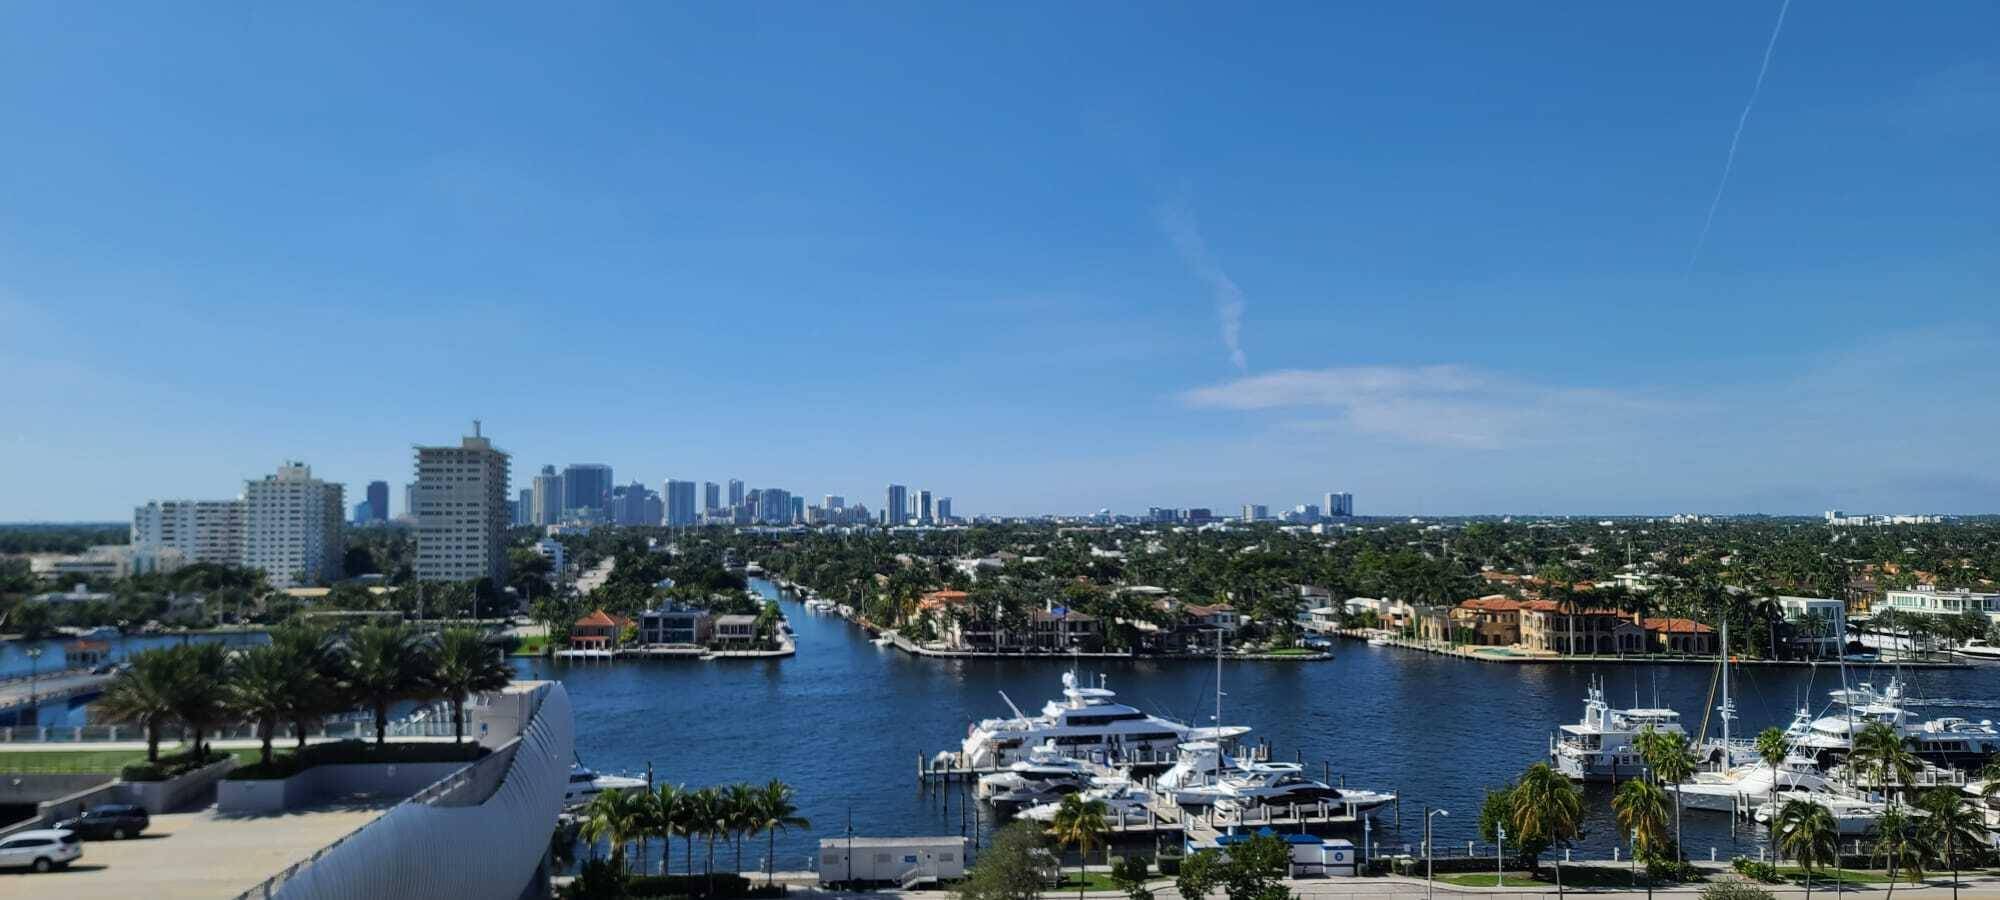 Amazing location pent house condo listing with direct intracoastal and marina views !